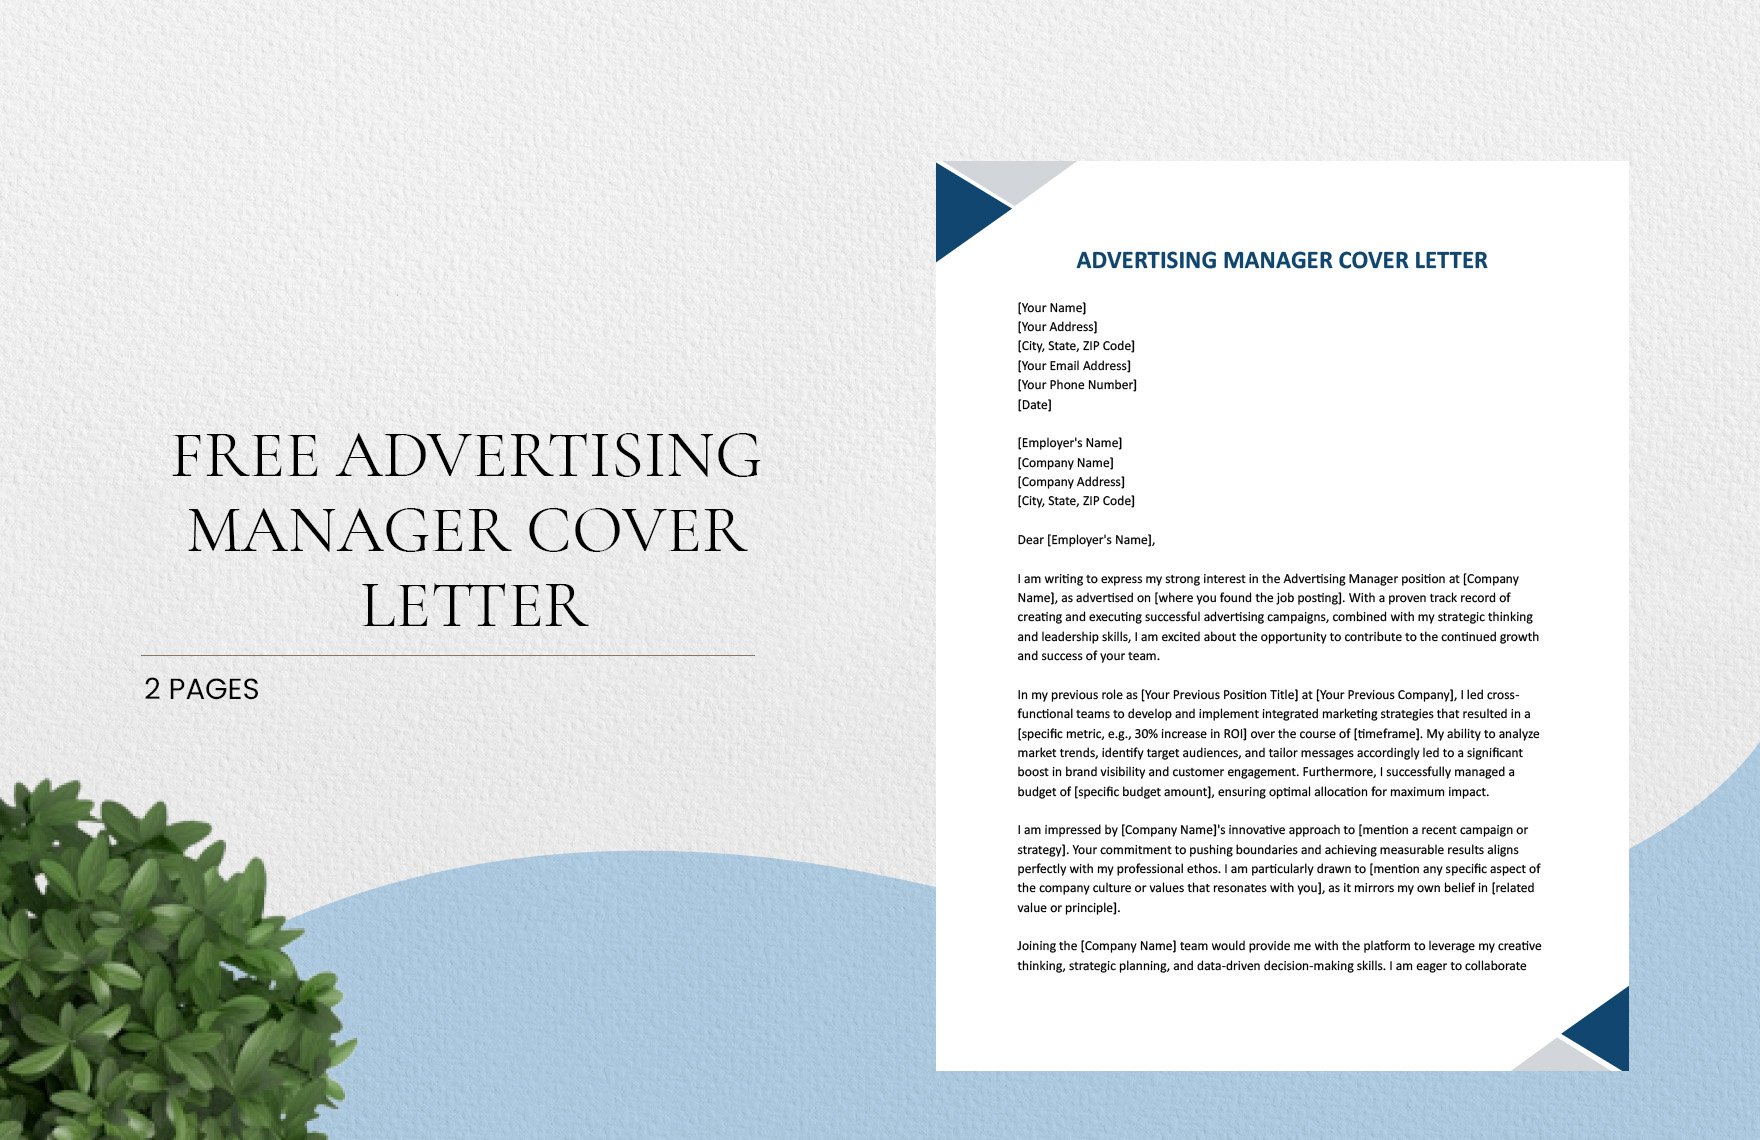 Advertising Manager Cover Letter